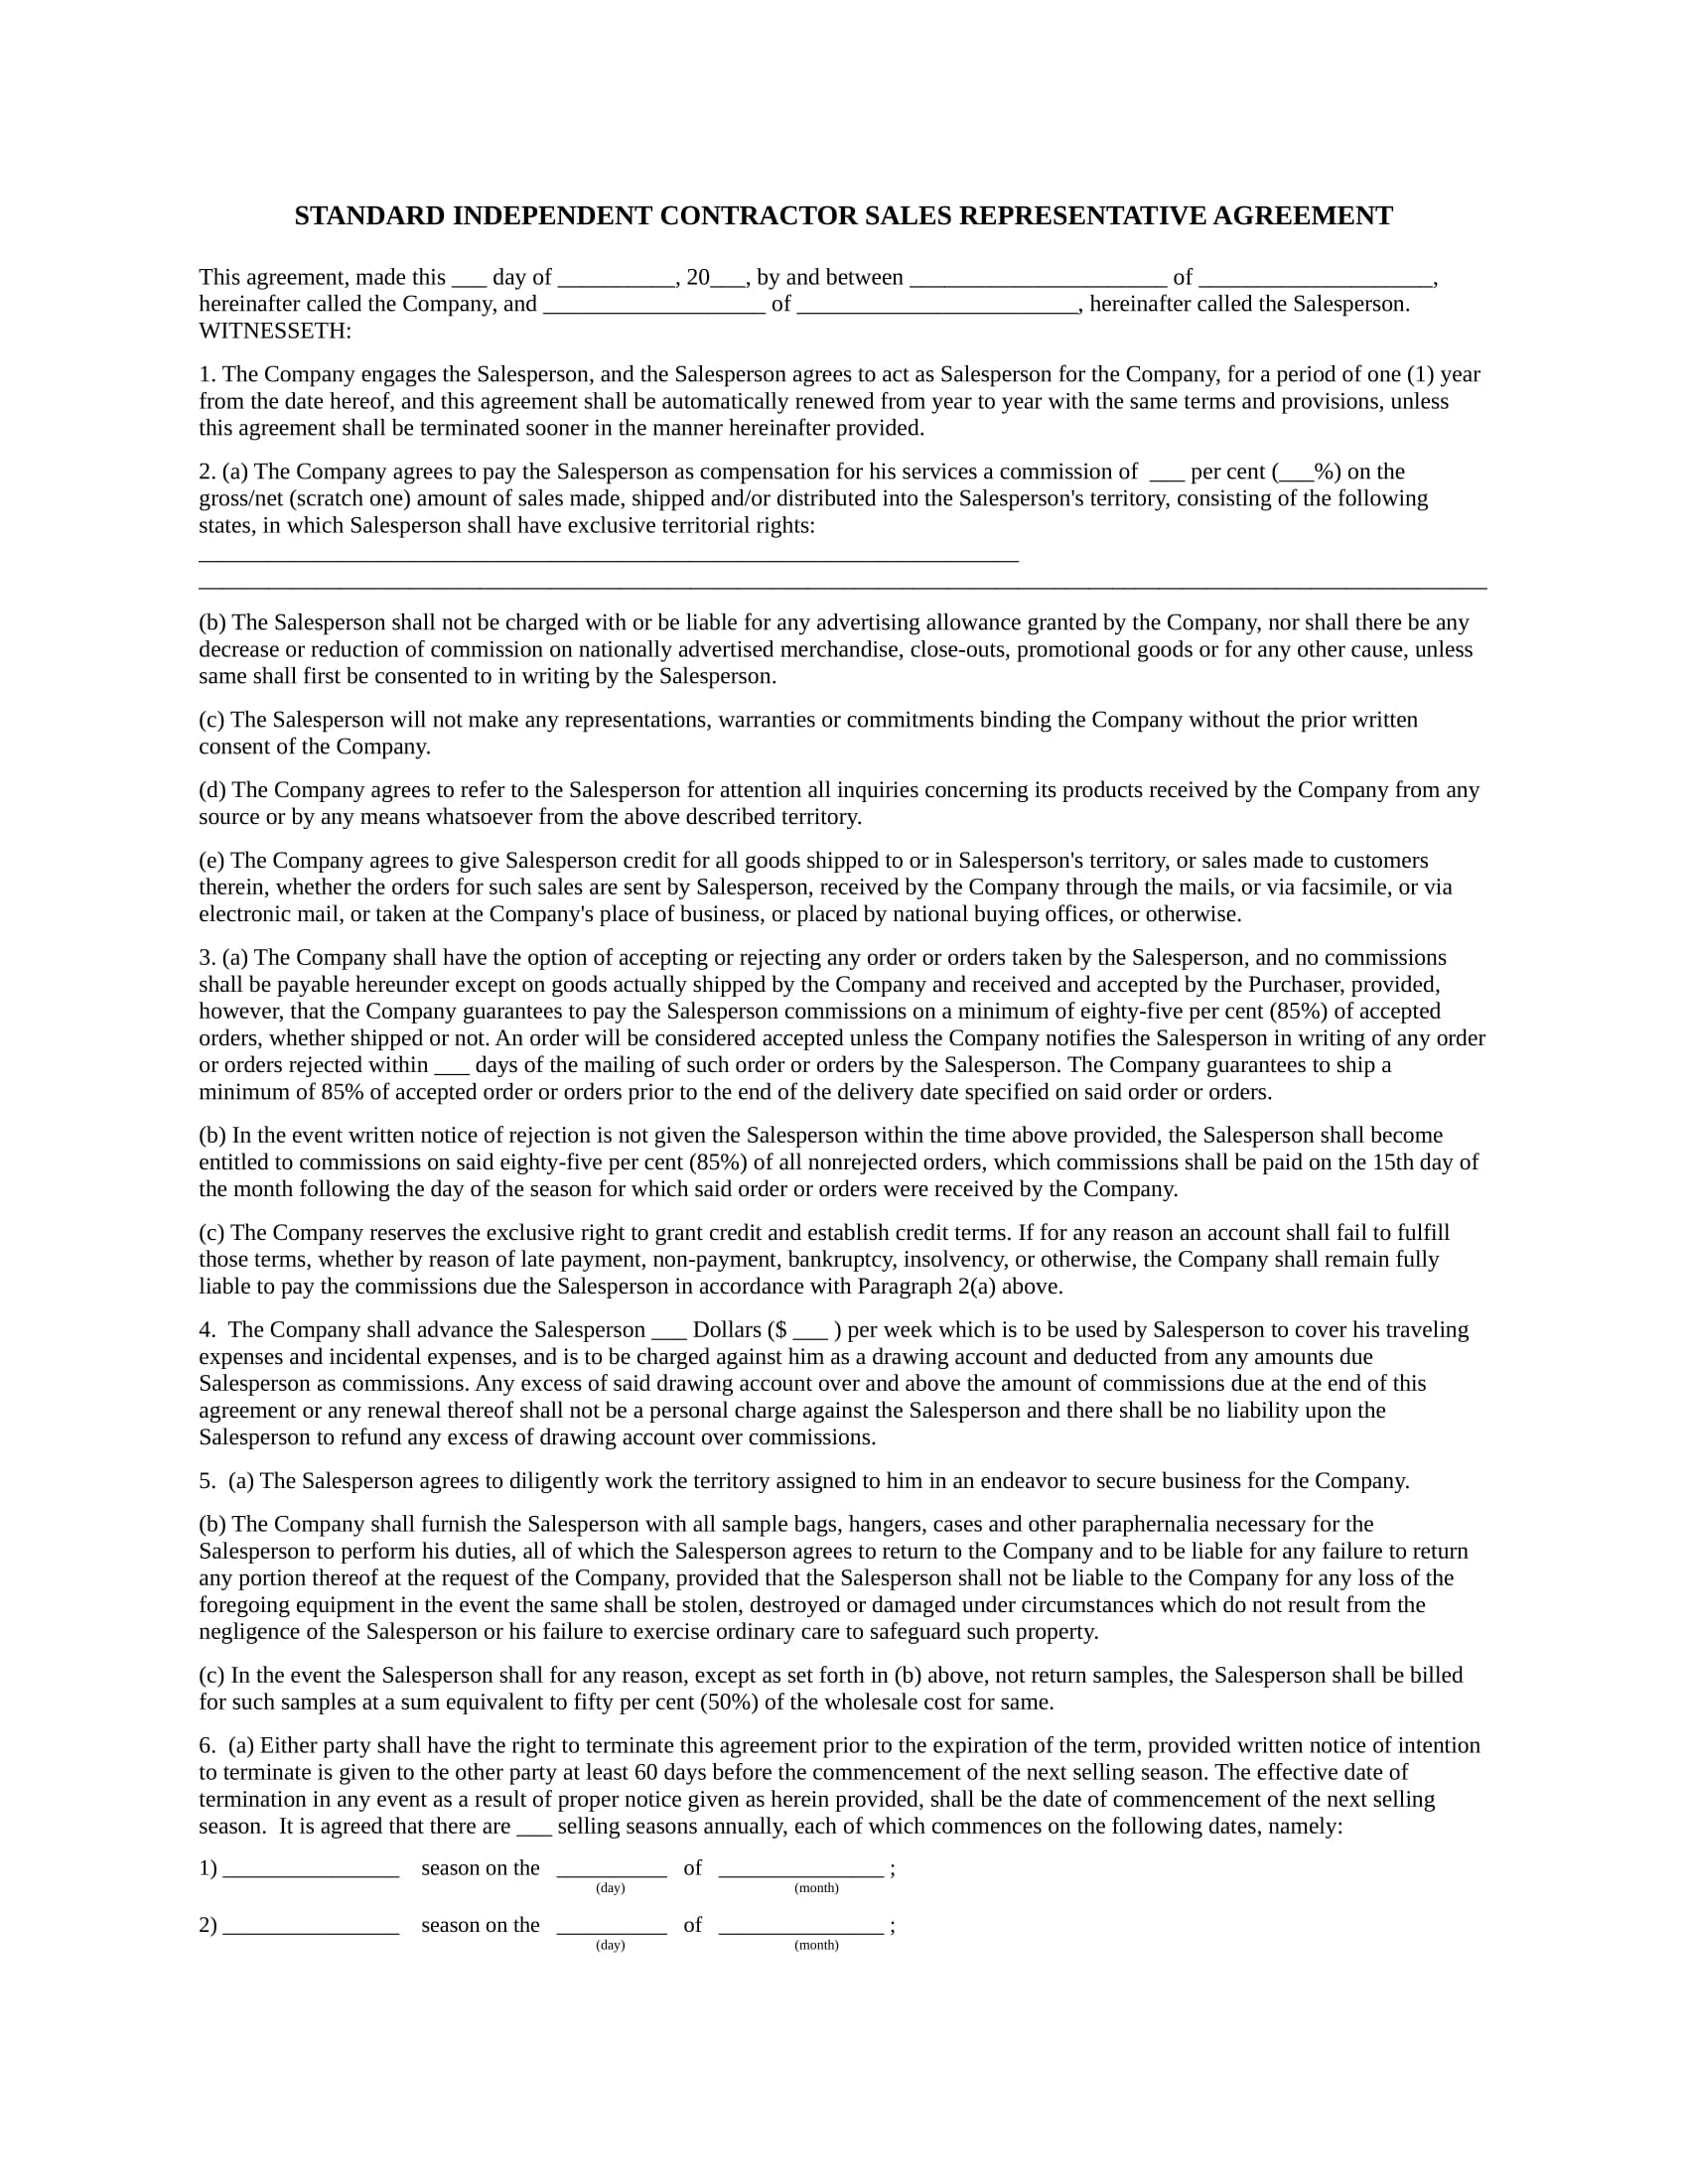 Company Representative Agreement 3 Salesperson Agreement Contract Forms Pdf Doc